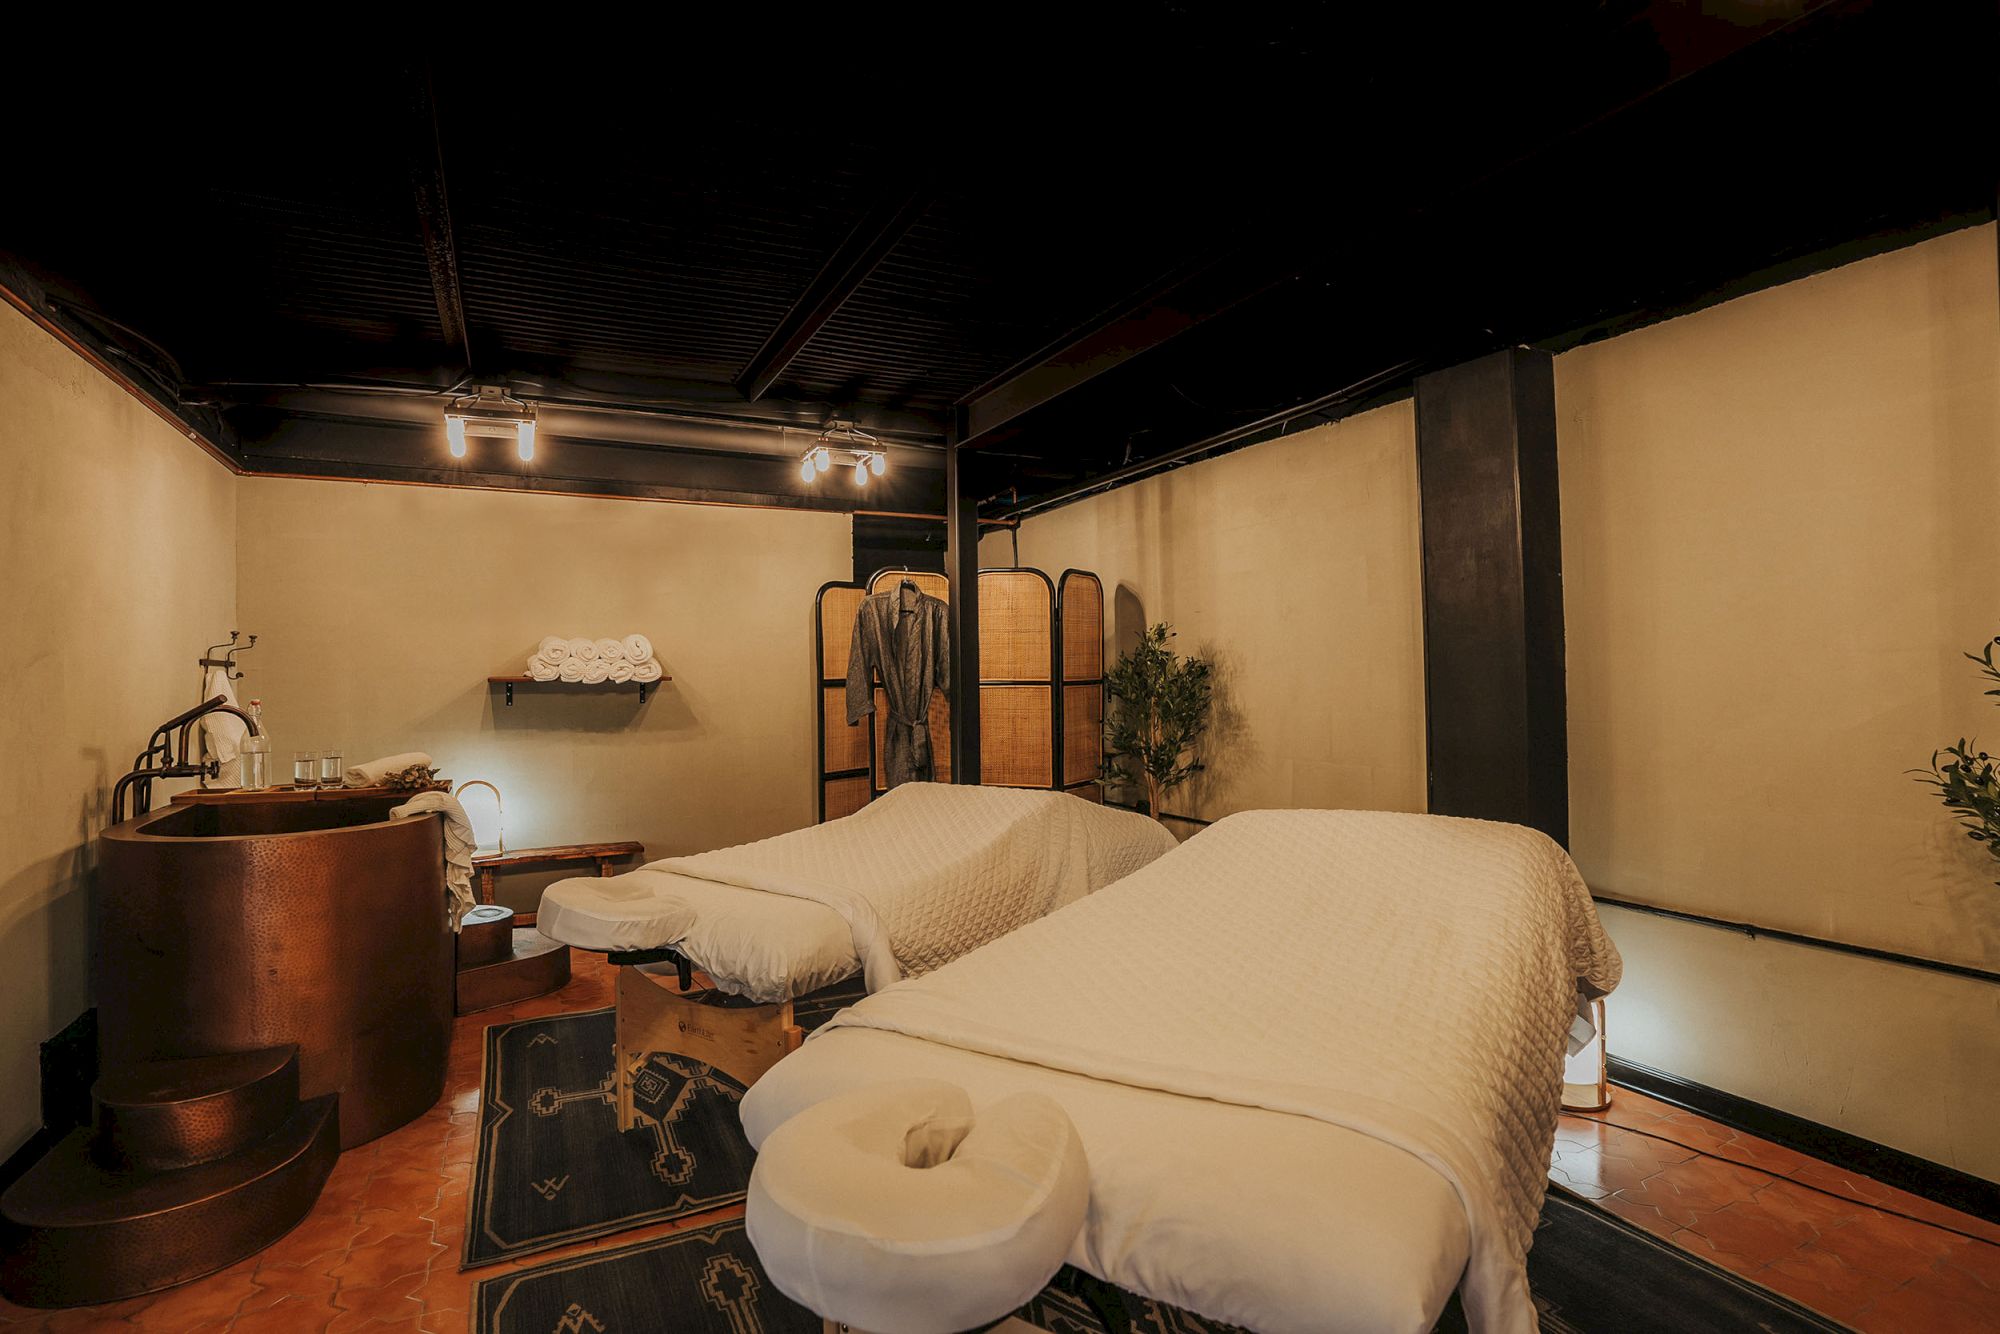 A serene spa room with two massage tables, towels, and a wooden tub nearby, creating a calming and inviting atmosphere for relaxation.